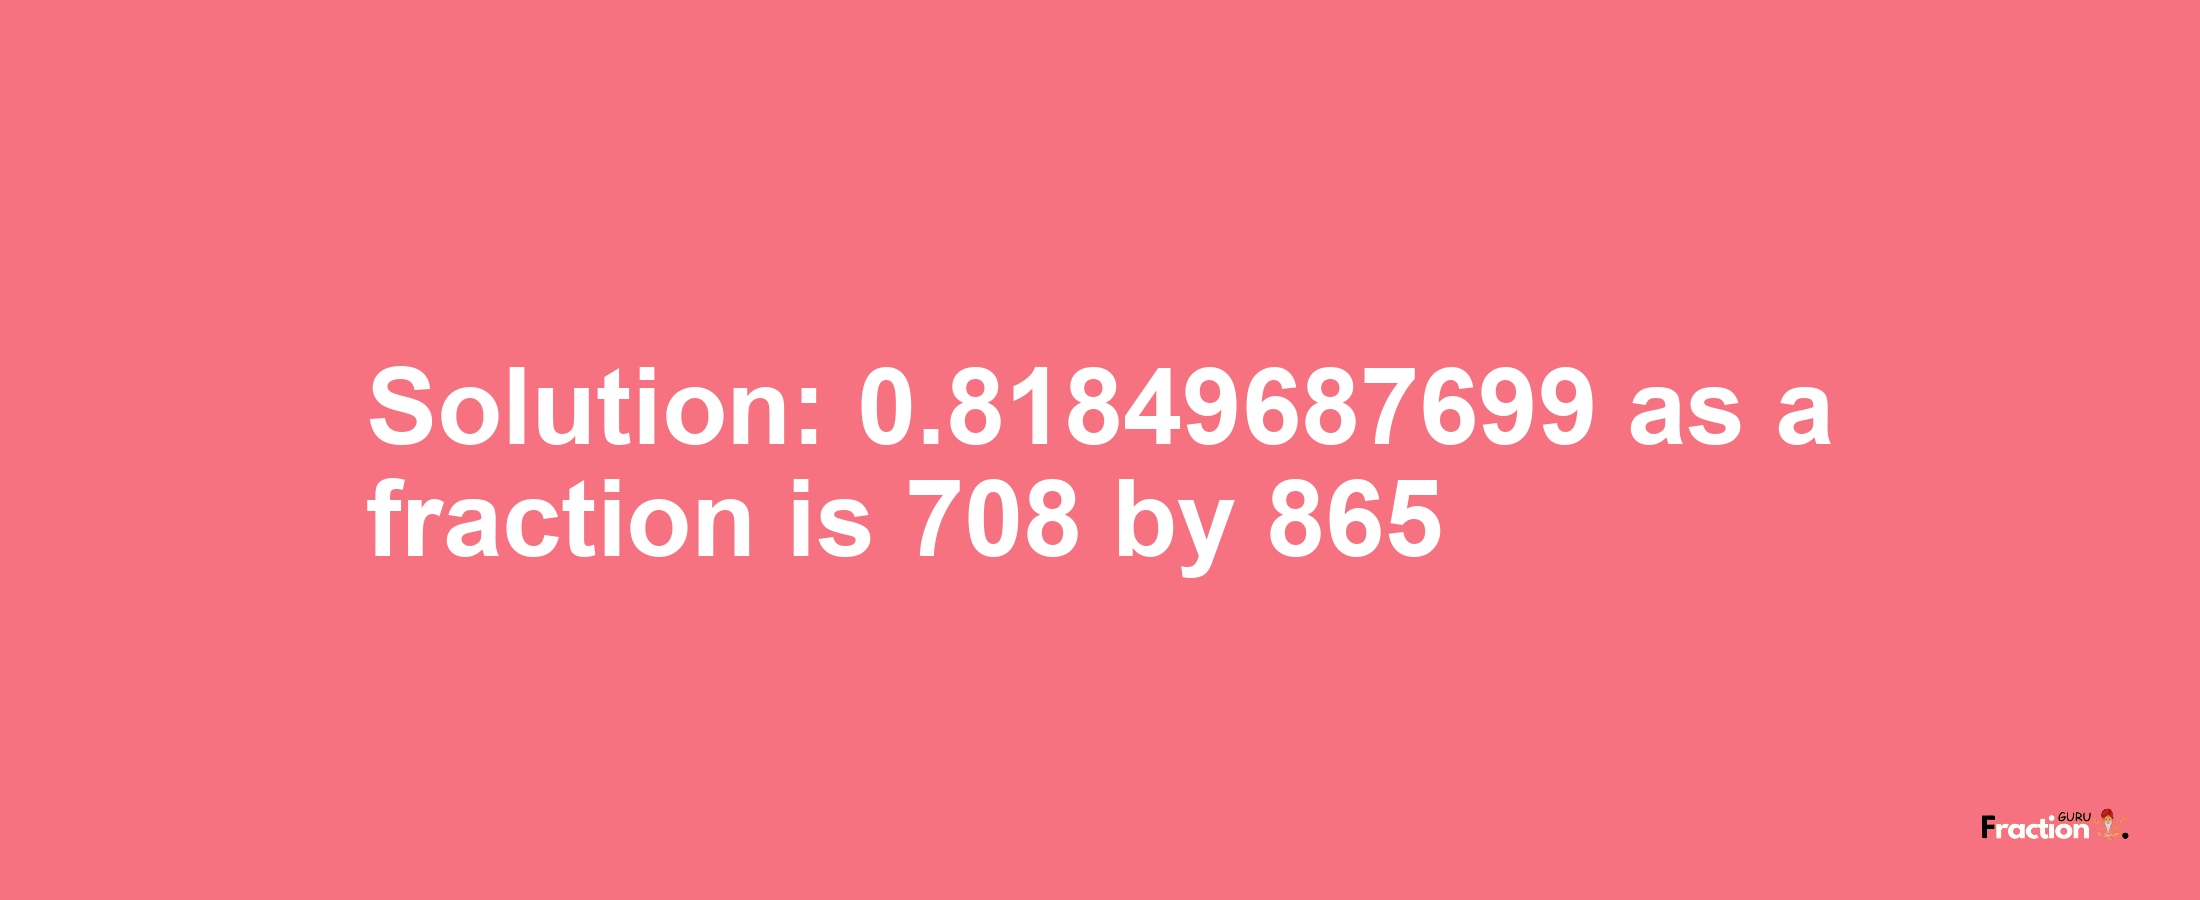 Solution:0.81849687699 as a fraction is 708/865